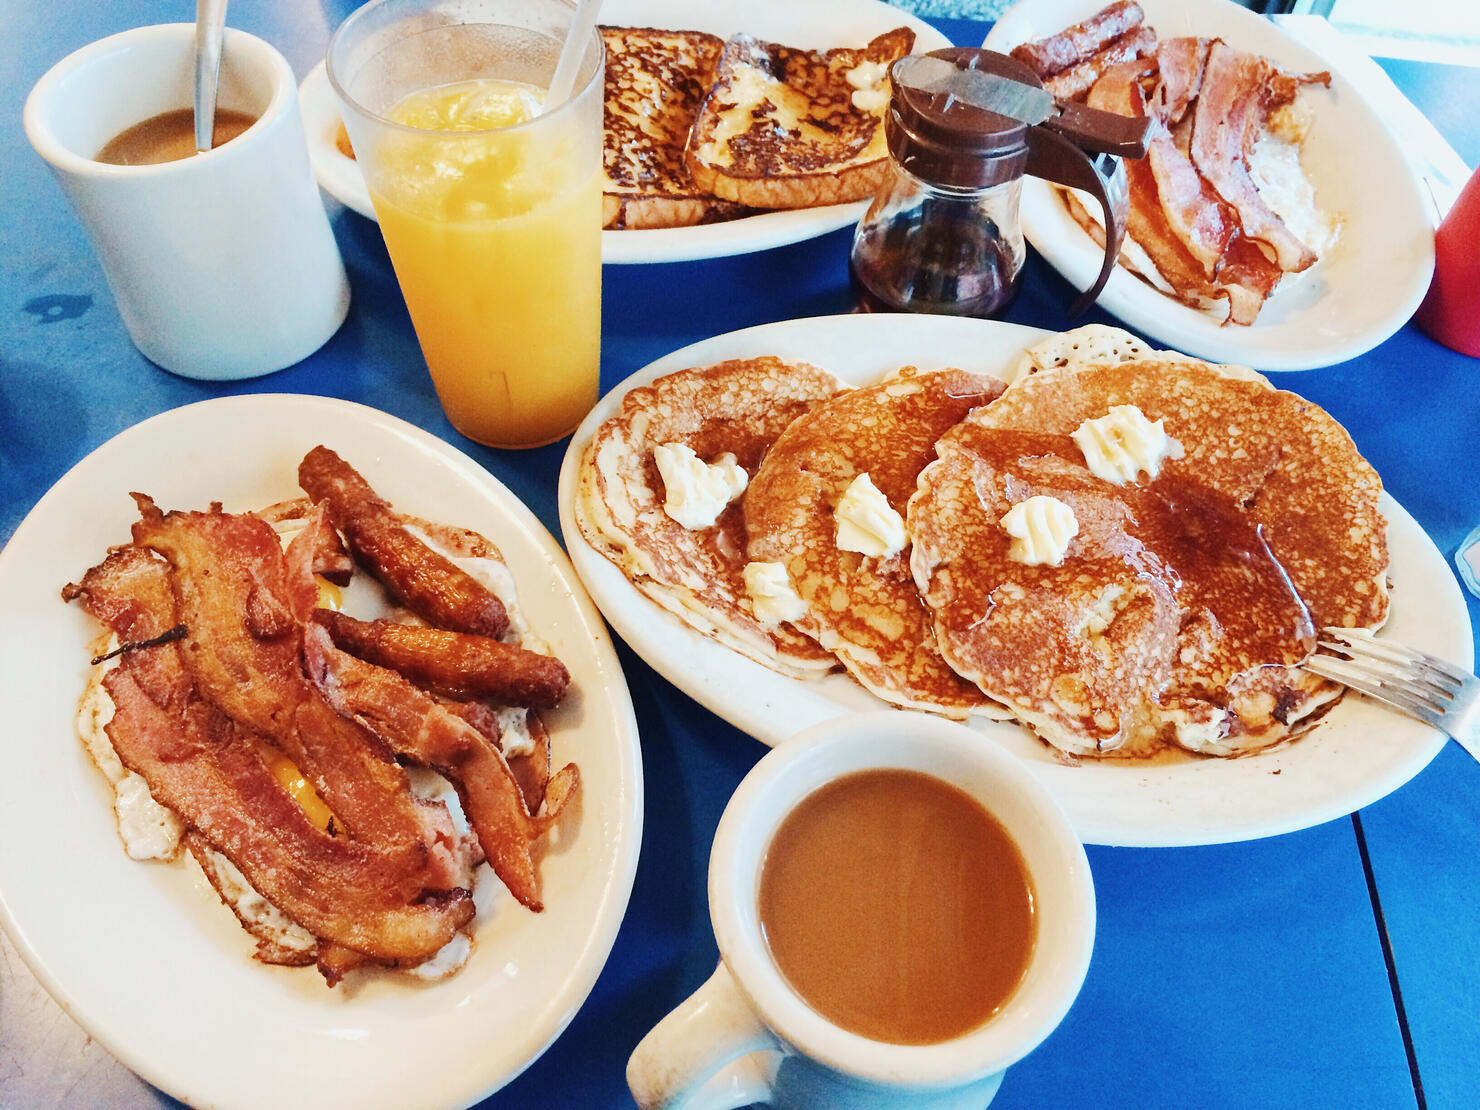 Classic American breakfast with fried eggs, bacon, pancakes, maple syrup and coffee served in a diner